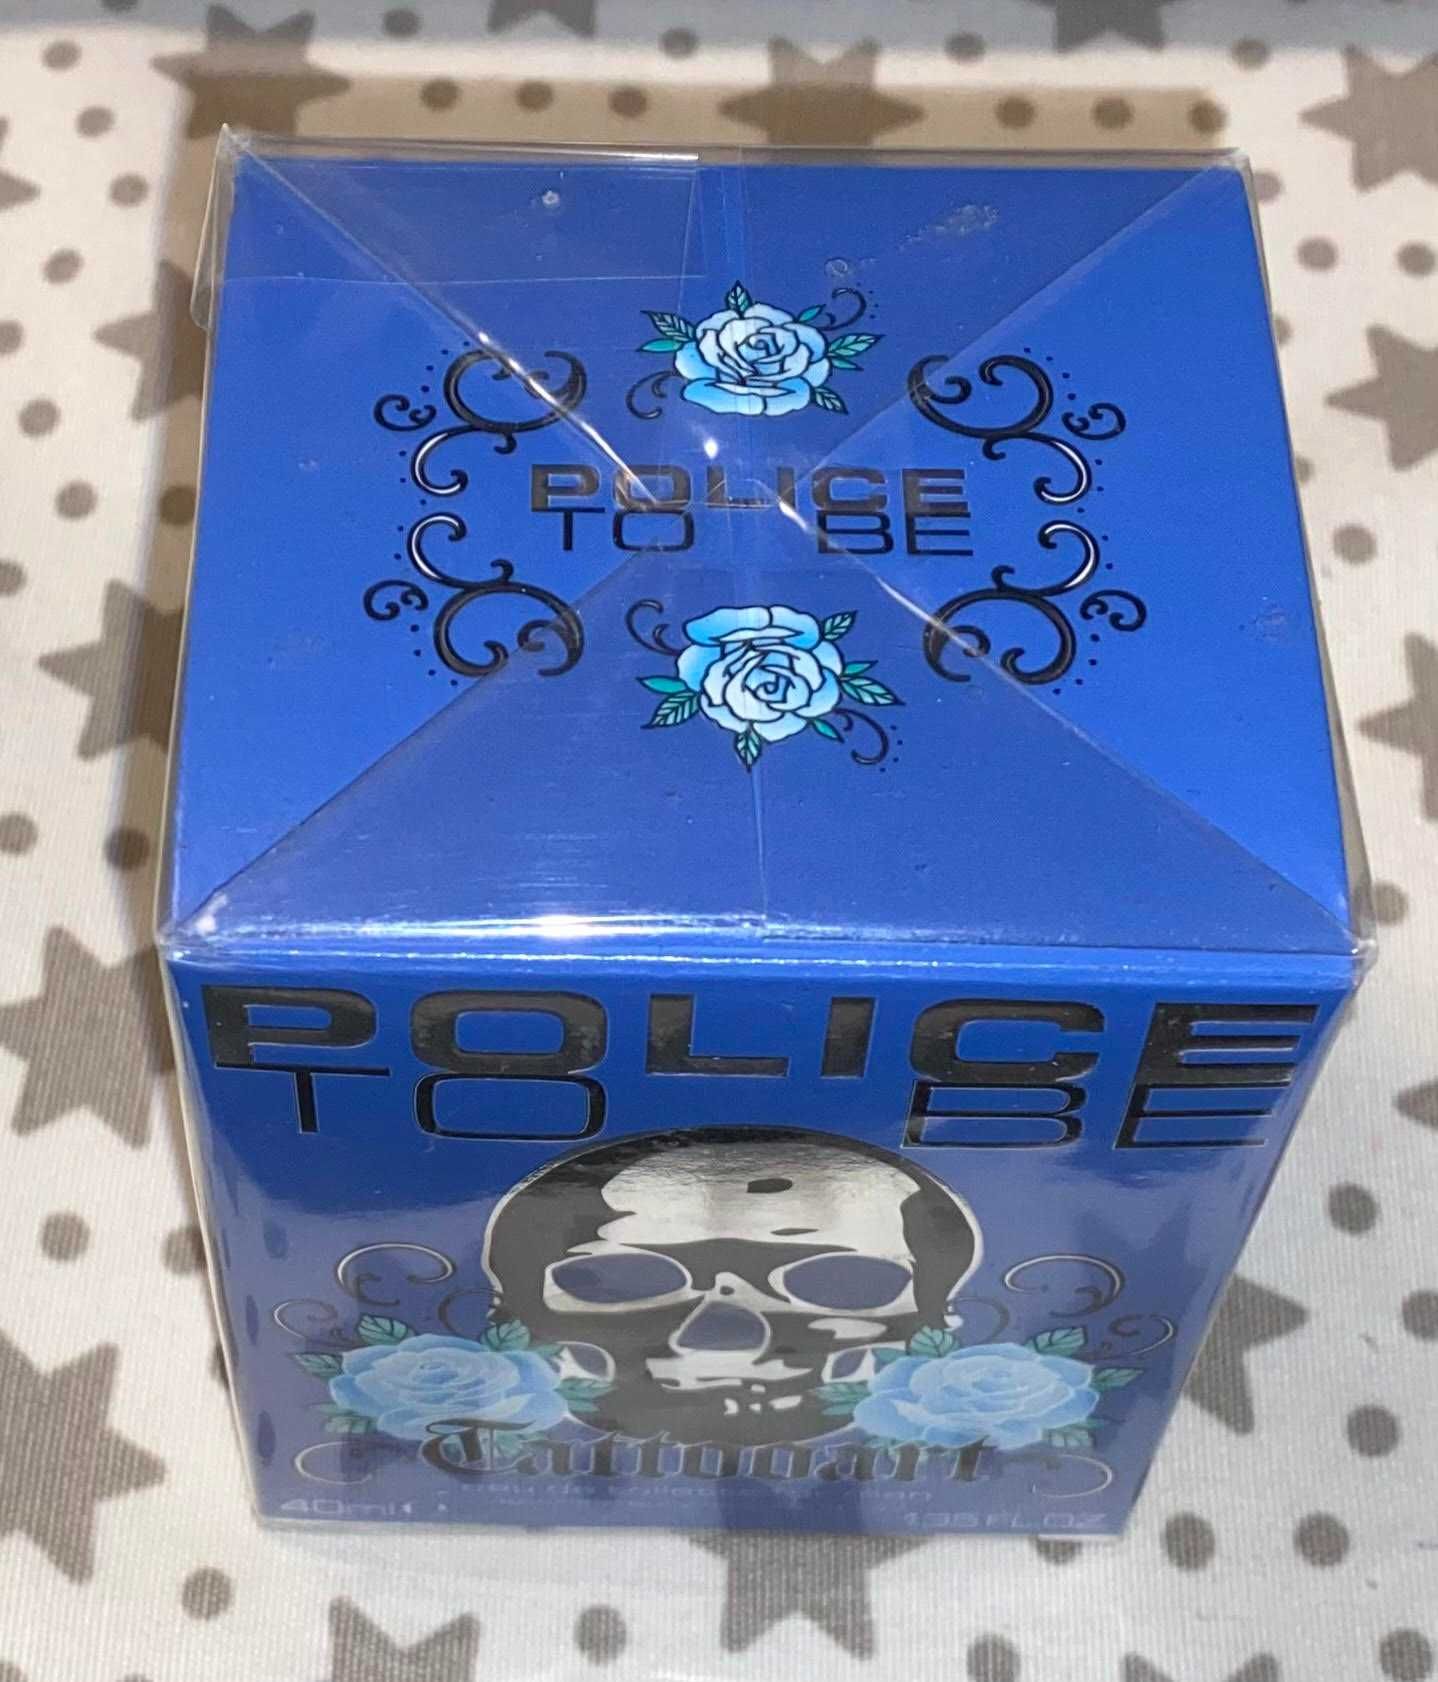 Perfumy Police To Be Tattooart For Man 40ml  EDT